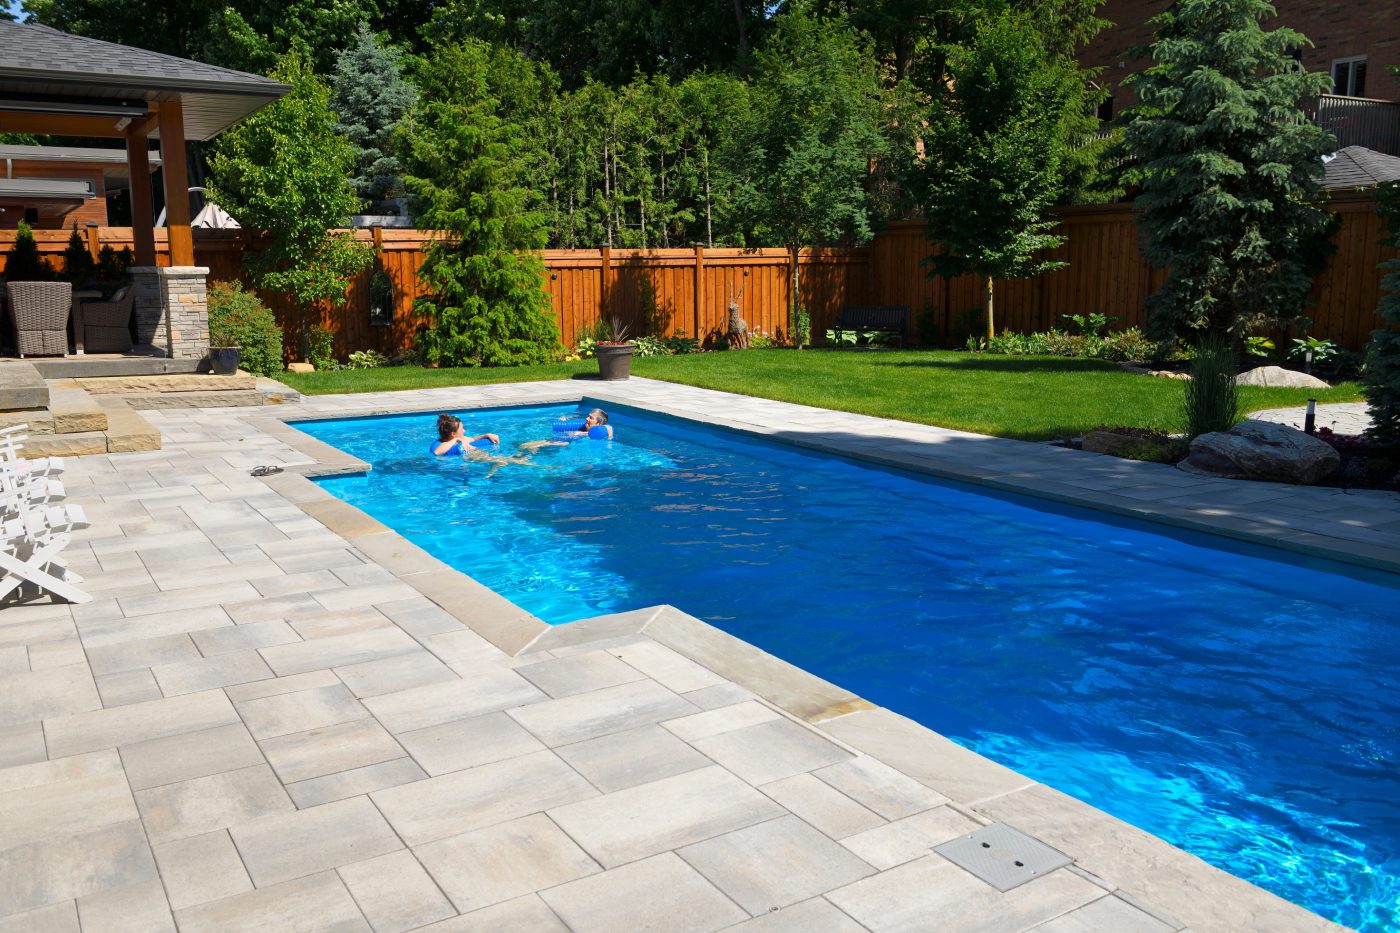 Maximize Your Property Value The Impact of Pool Deck Pavers Marble on Home Resale